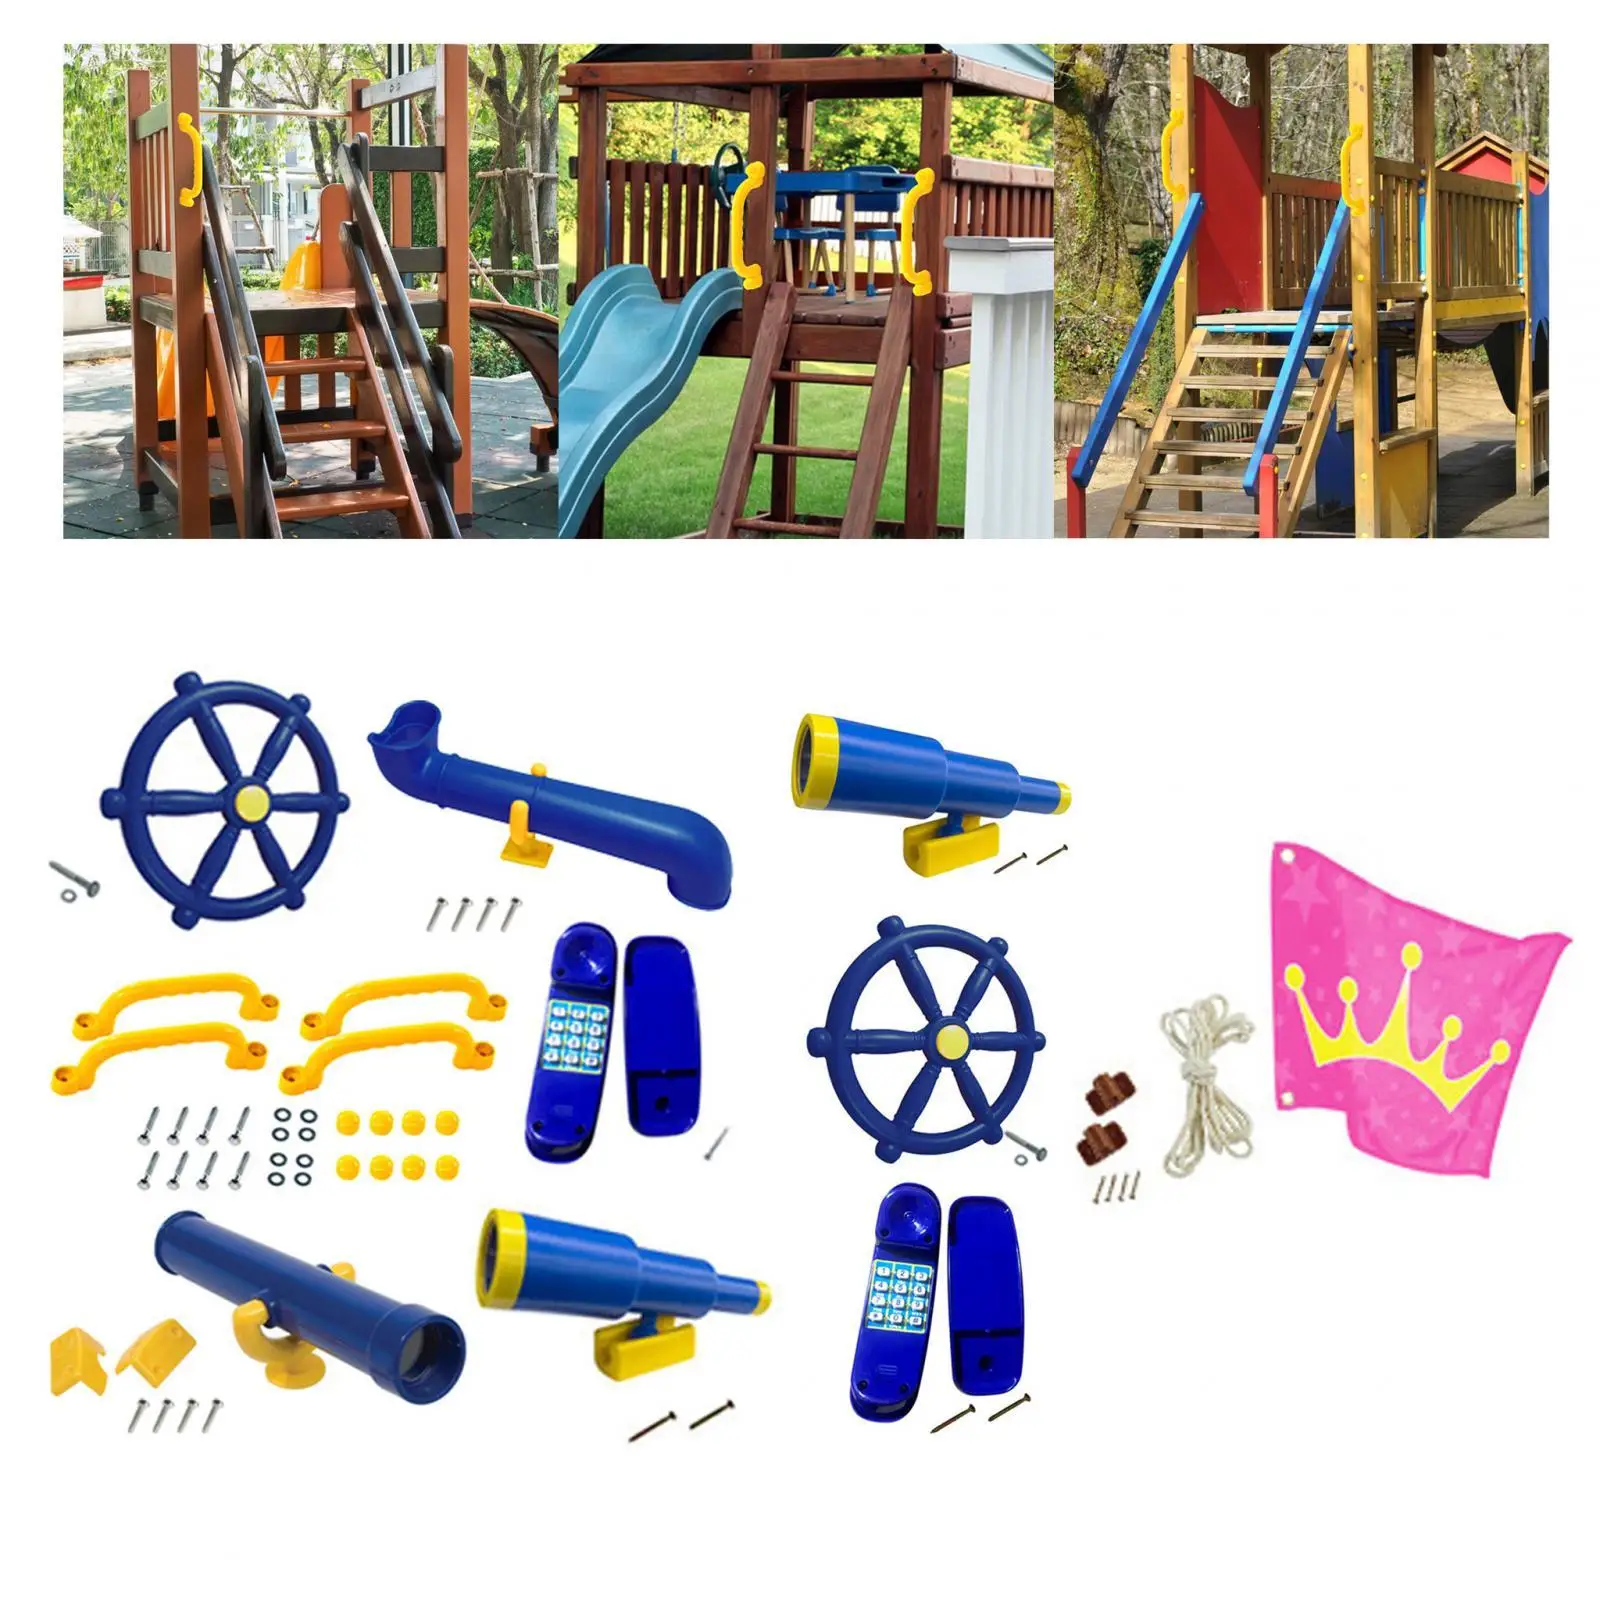 Playground Accessories Heavy Duty Pirate Telescope Outdoor Playset for Backyard Playhouse Tree House Jungle Gym Holiday Gifts